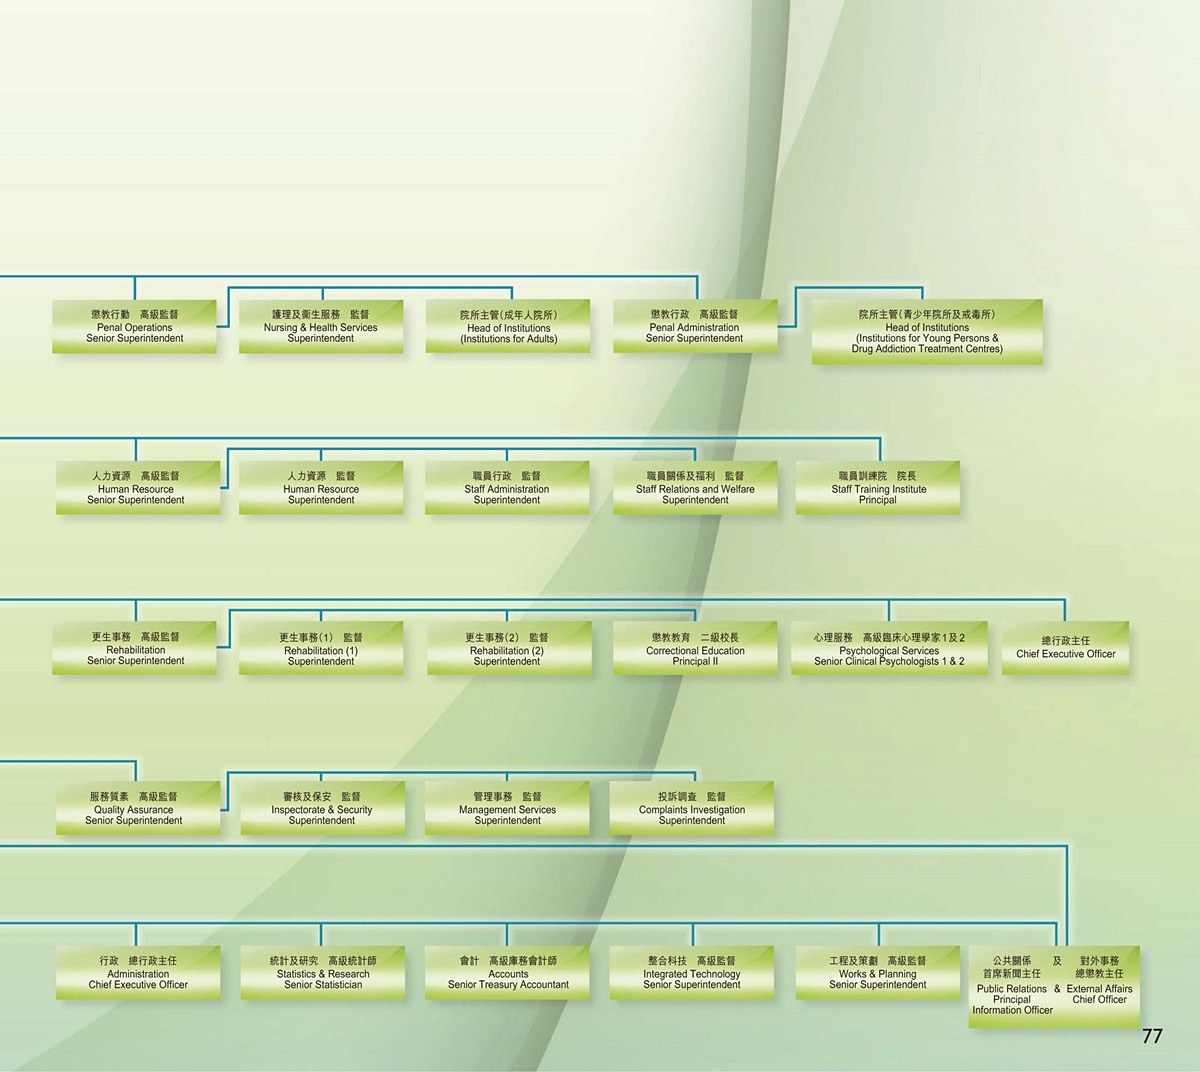 Organisation chart of Correctional Services Department Headquarters (as at 31.12.2013)